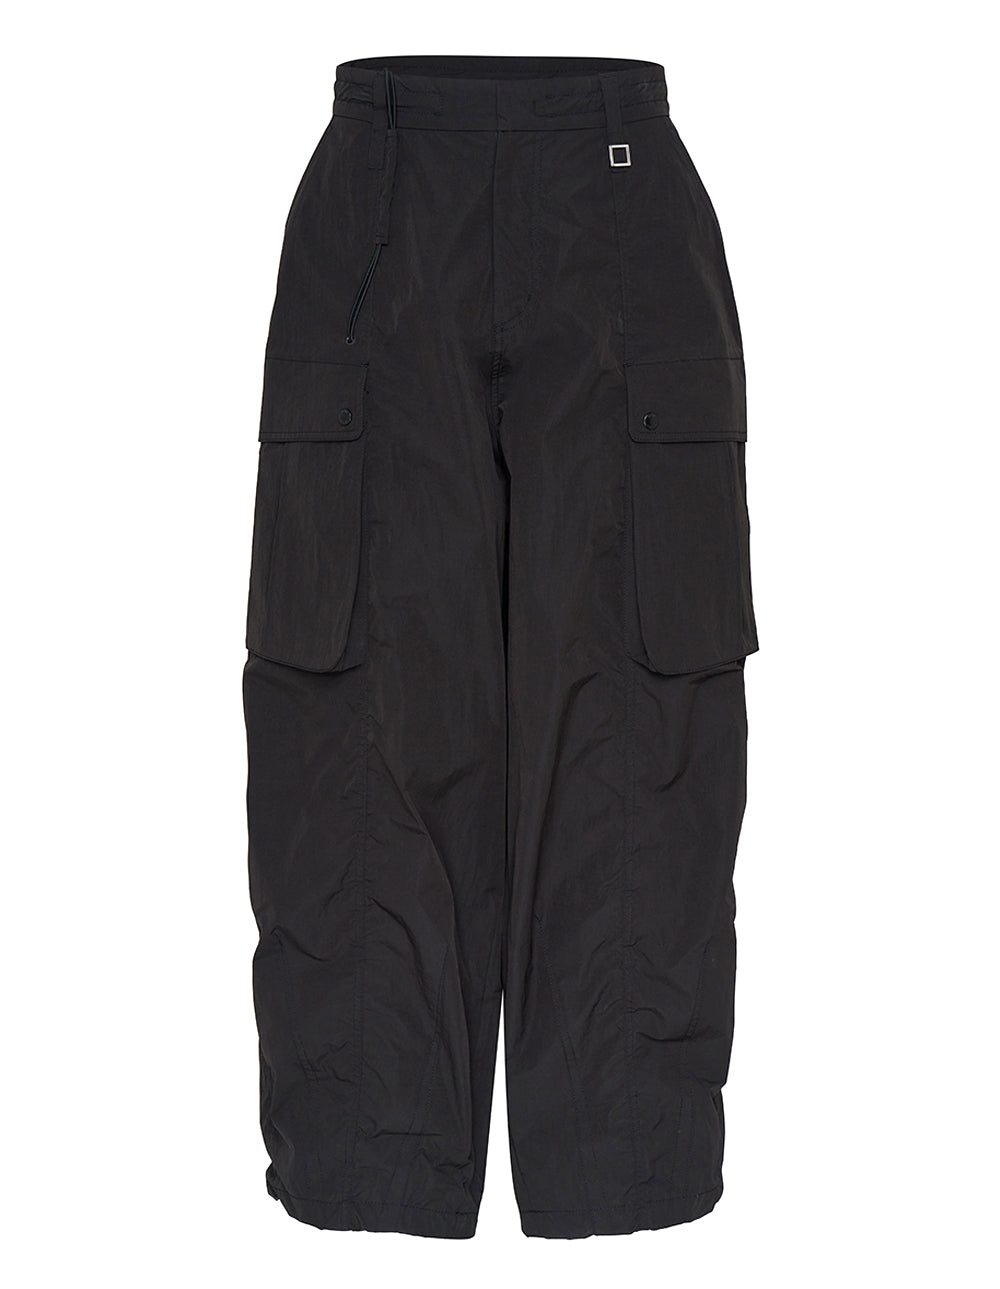 Mens Pants With Pockets